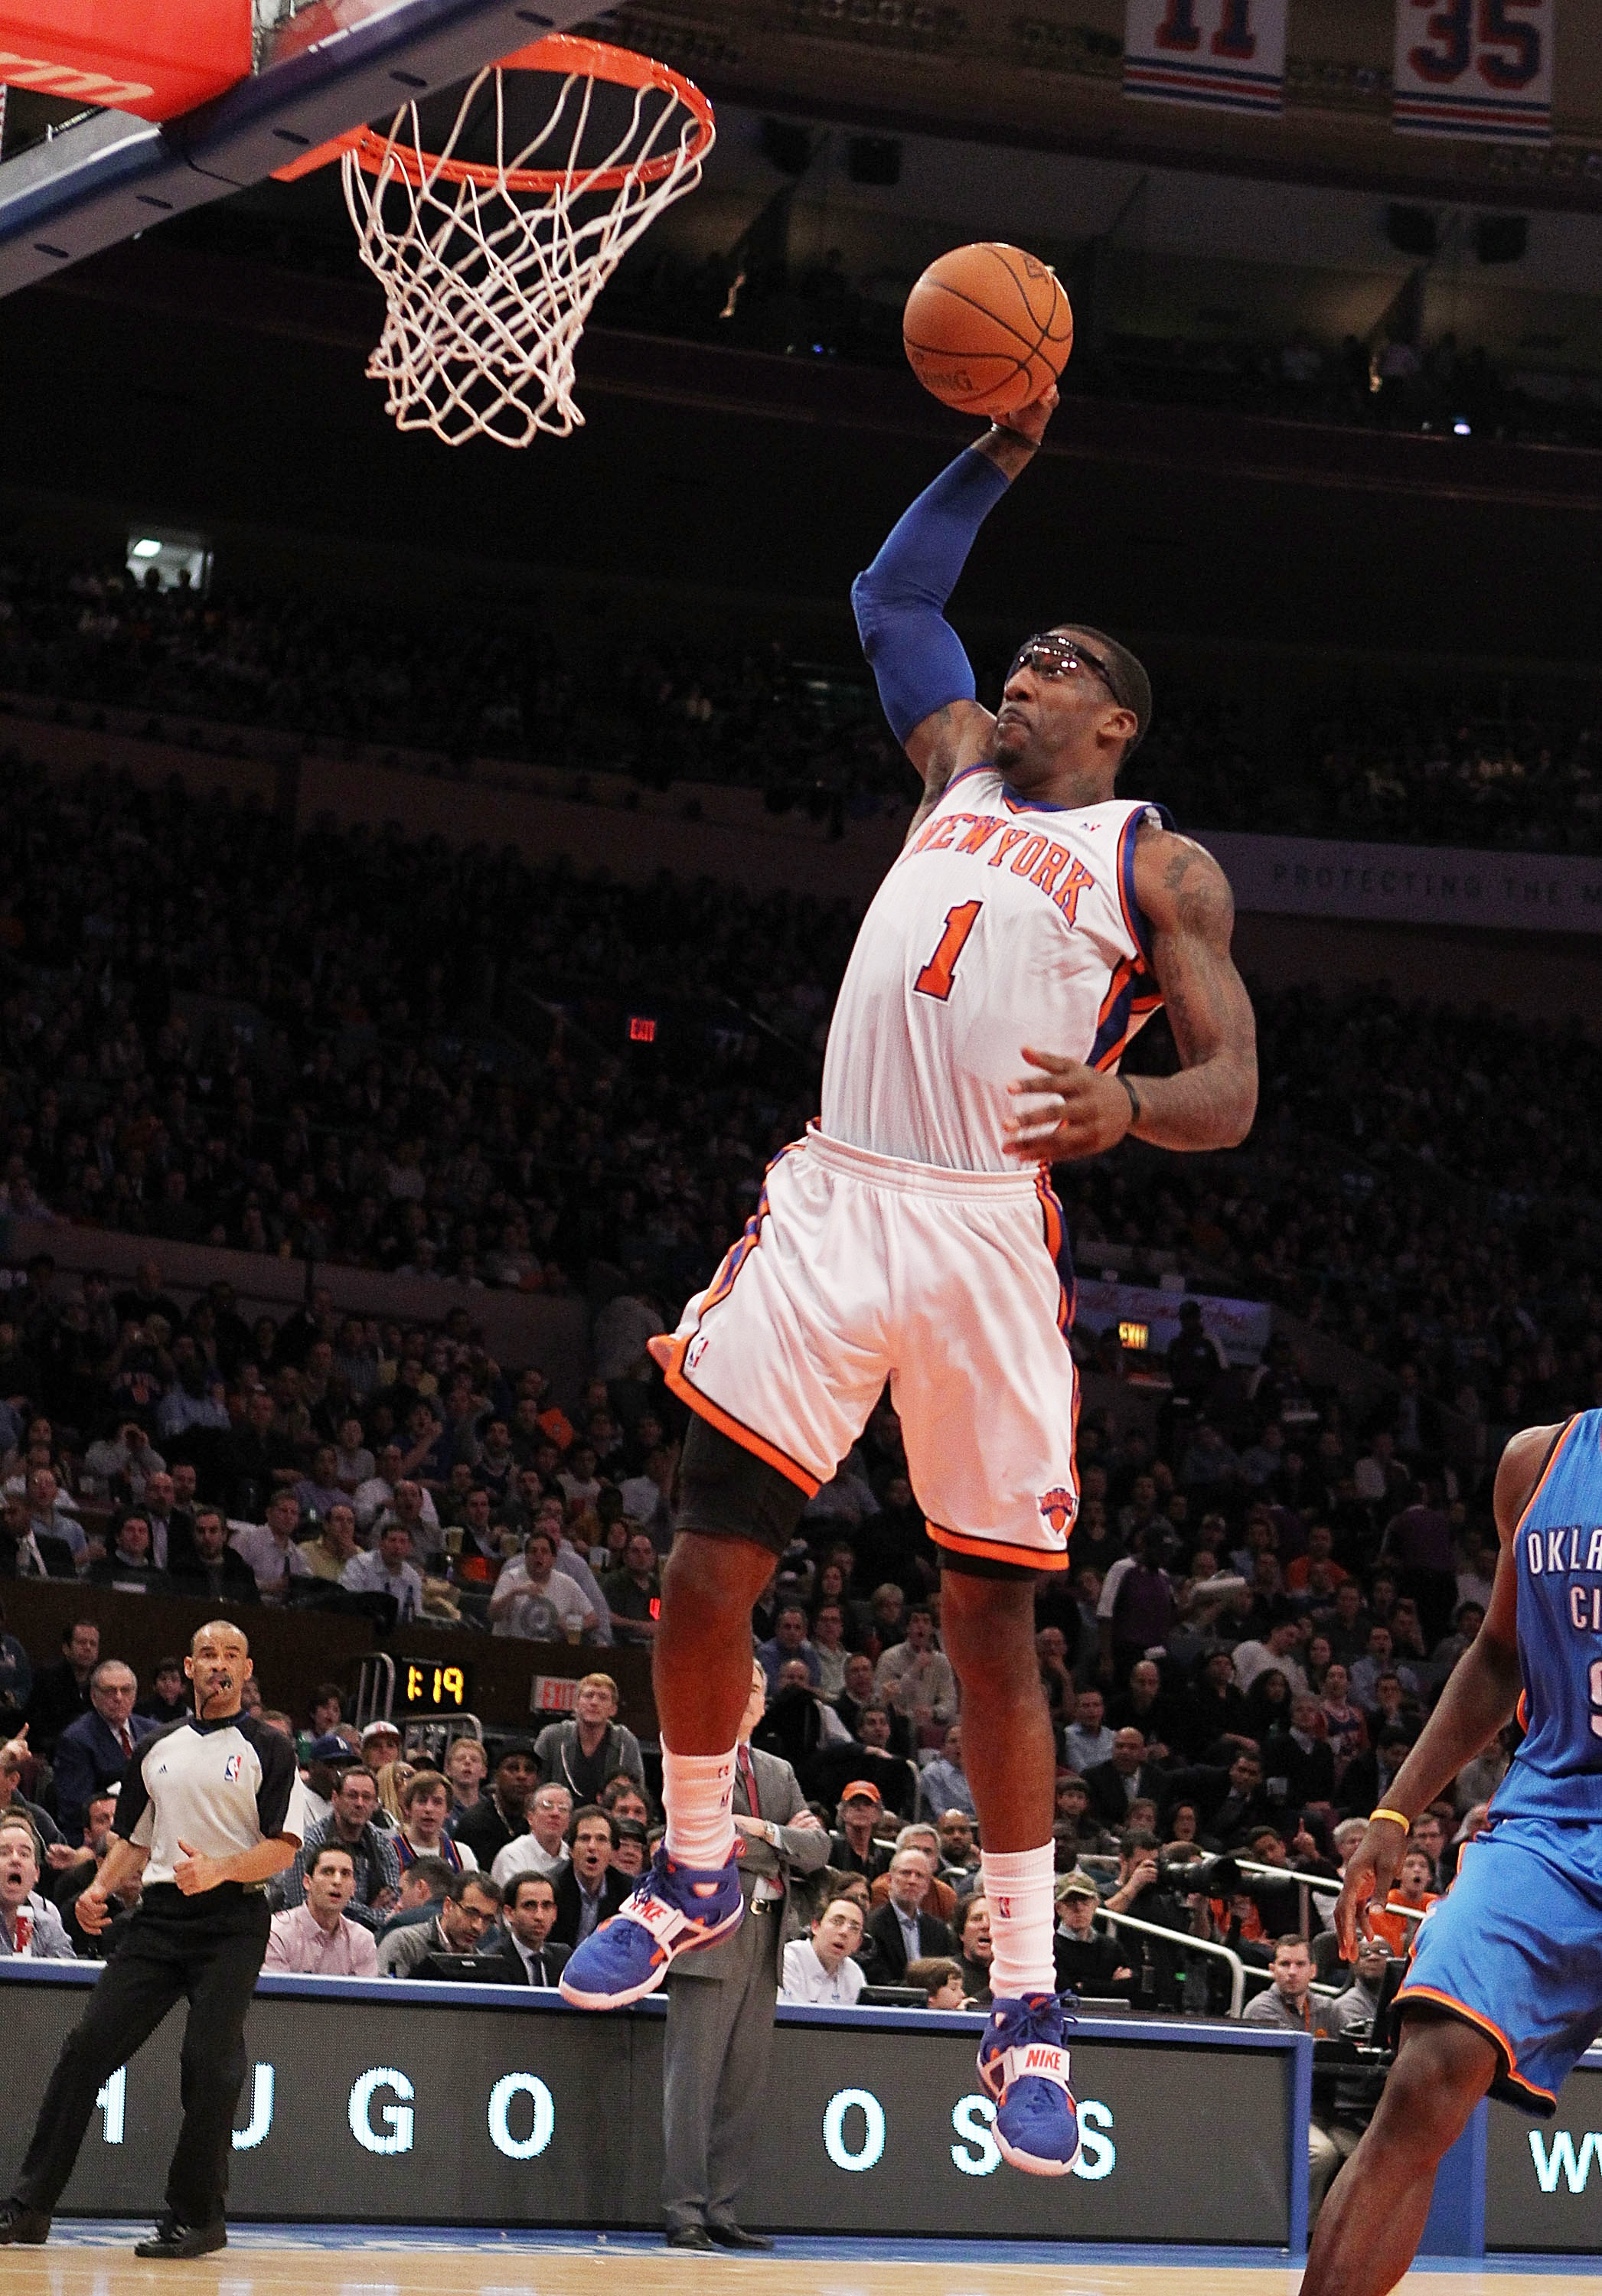 Amare Stoudemire: The Dunking Beast - Basketball Network - Your daily dose  of basketball